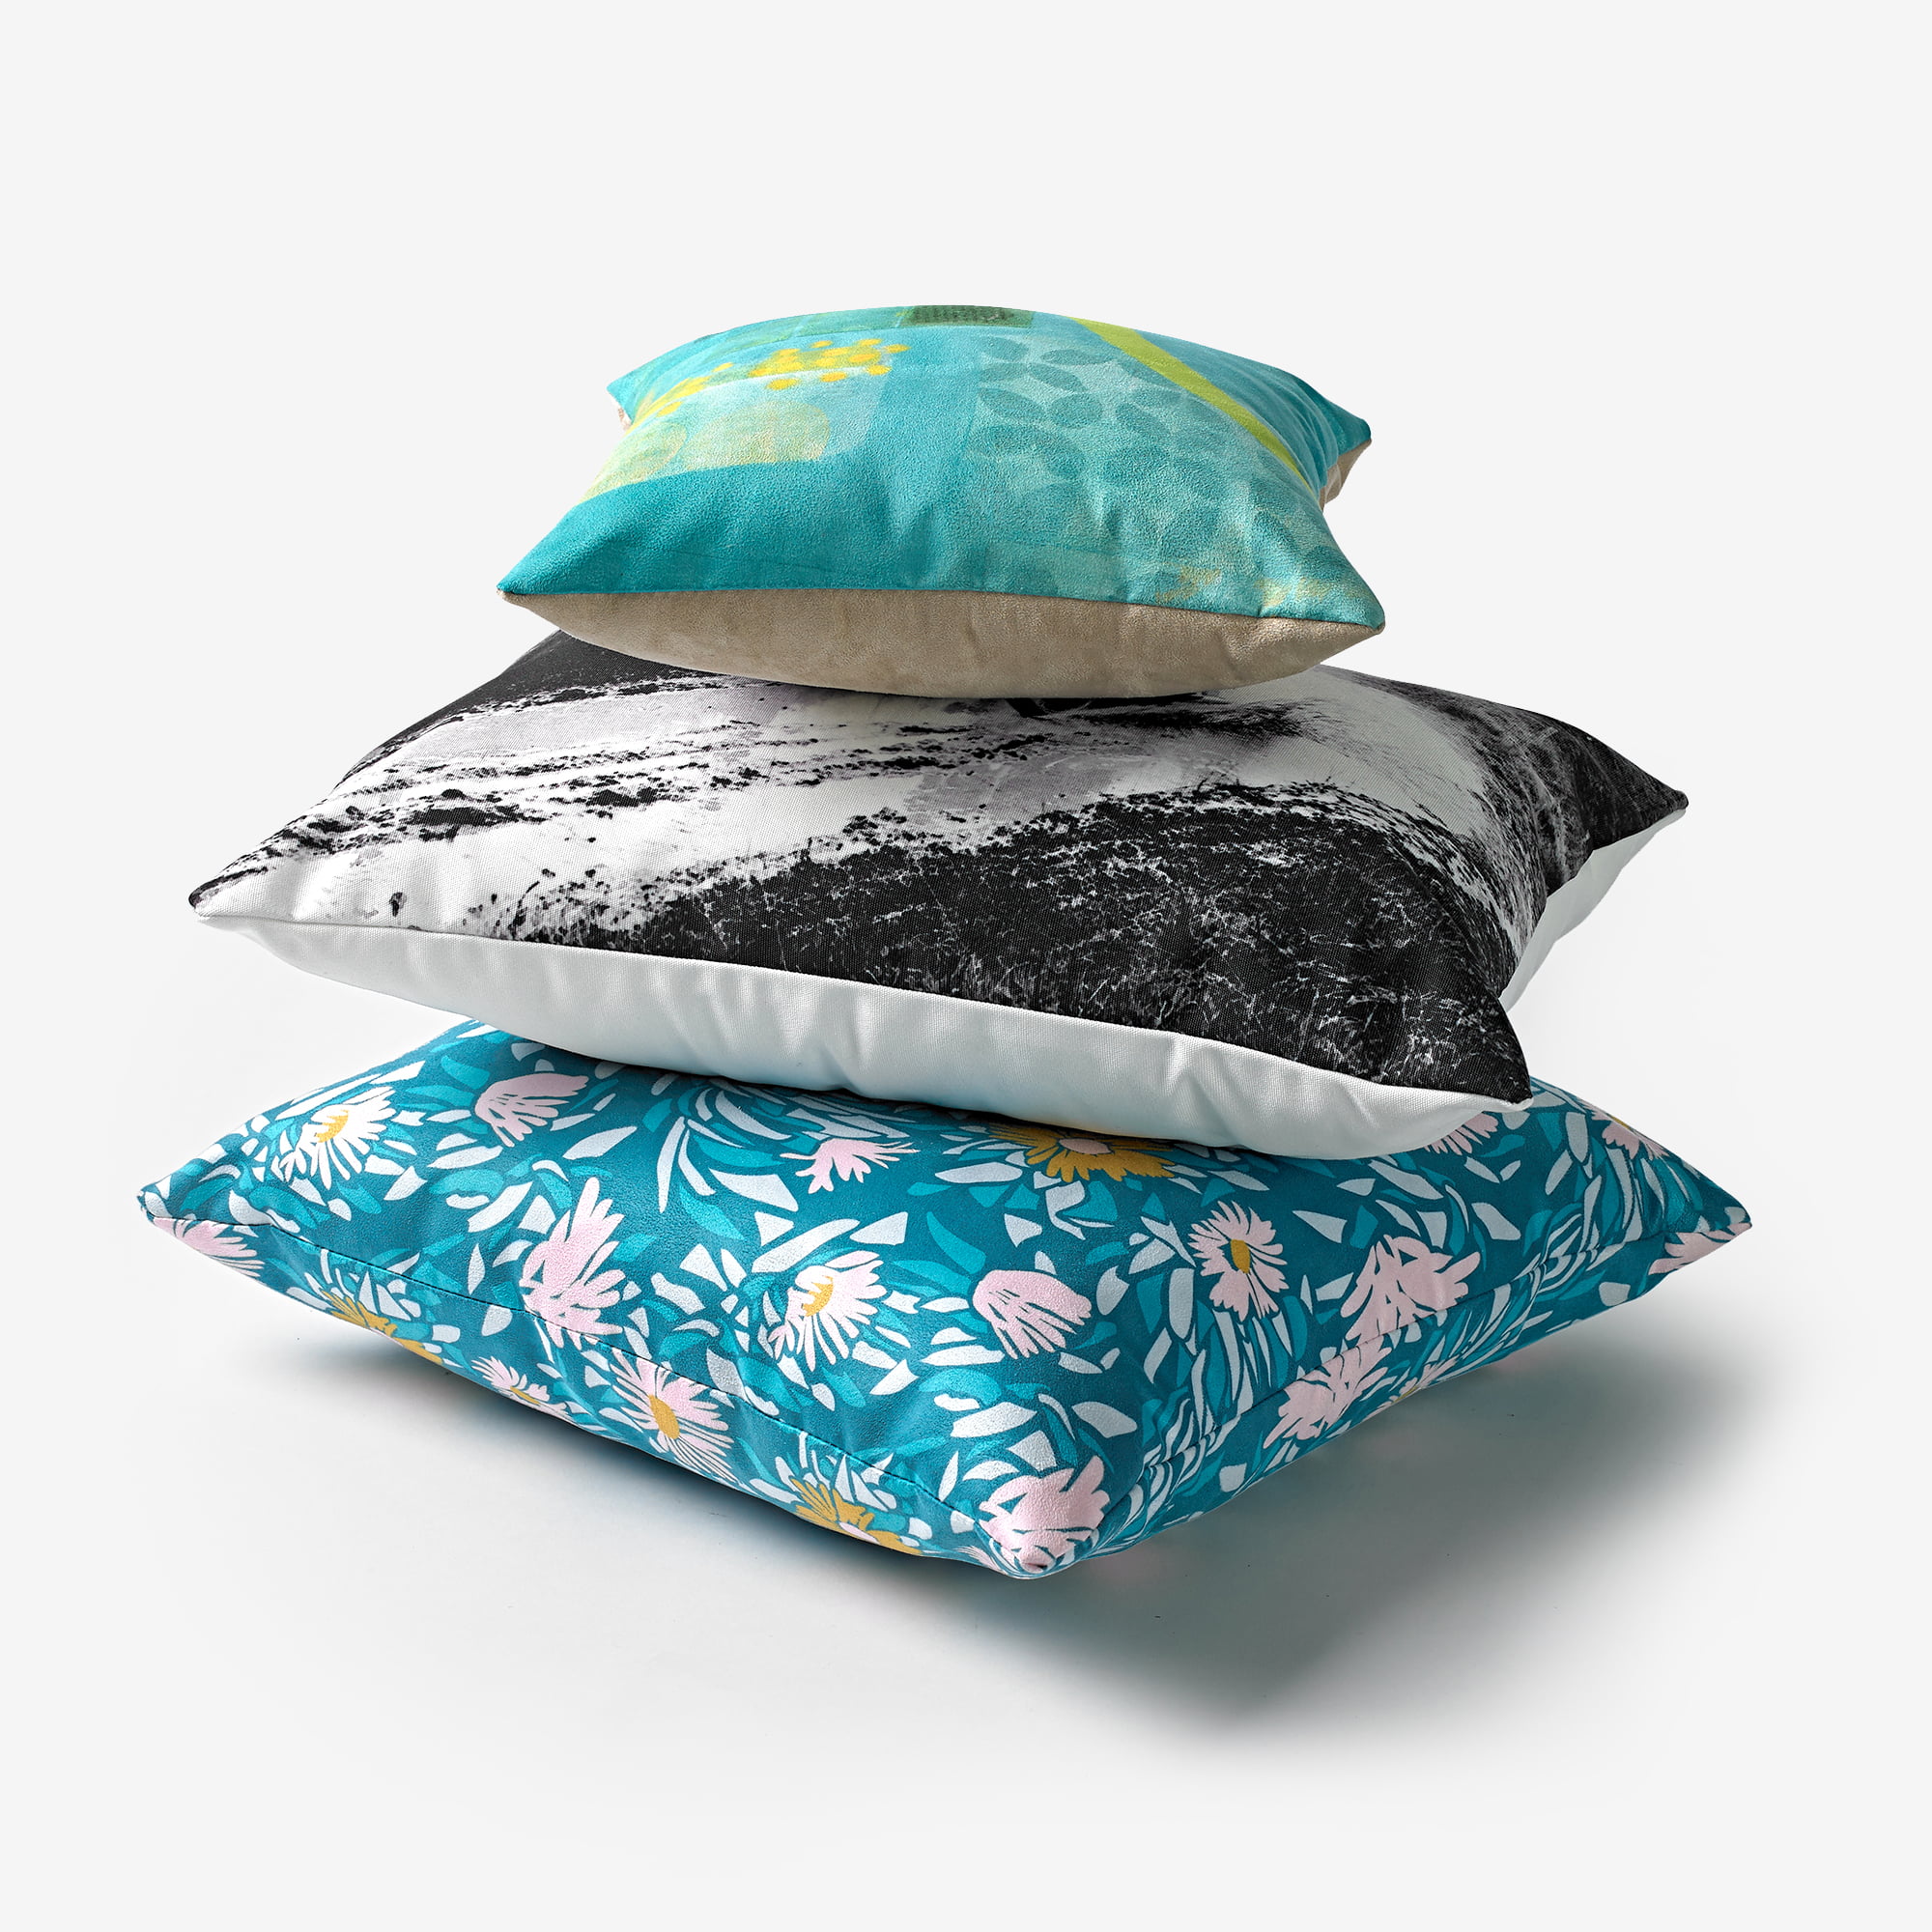 https://www.prodigi.com/img/products/card/category-home-and-living-cushions-and-pillows.jpg